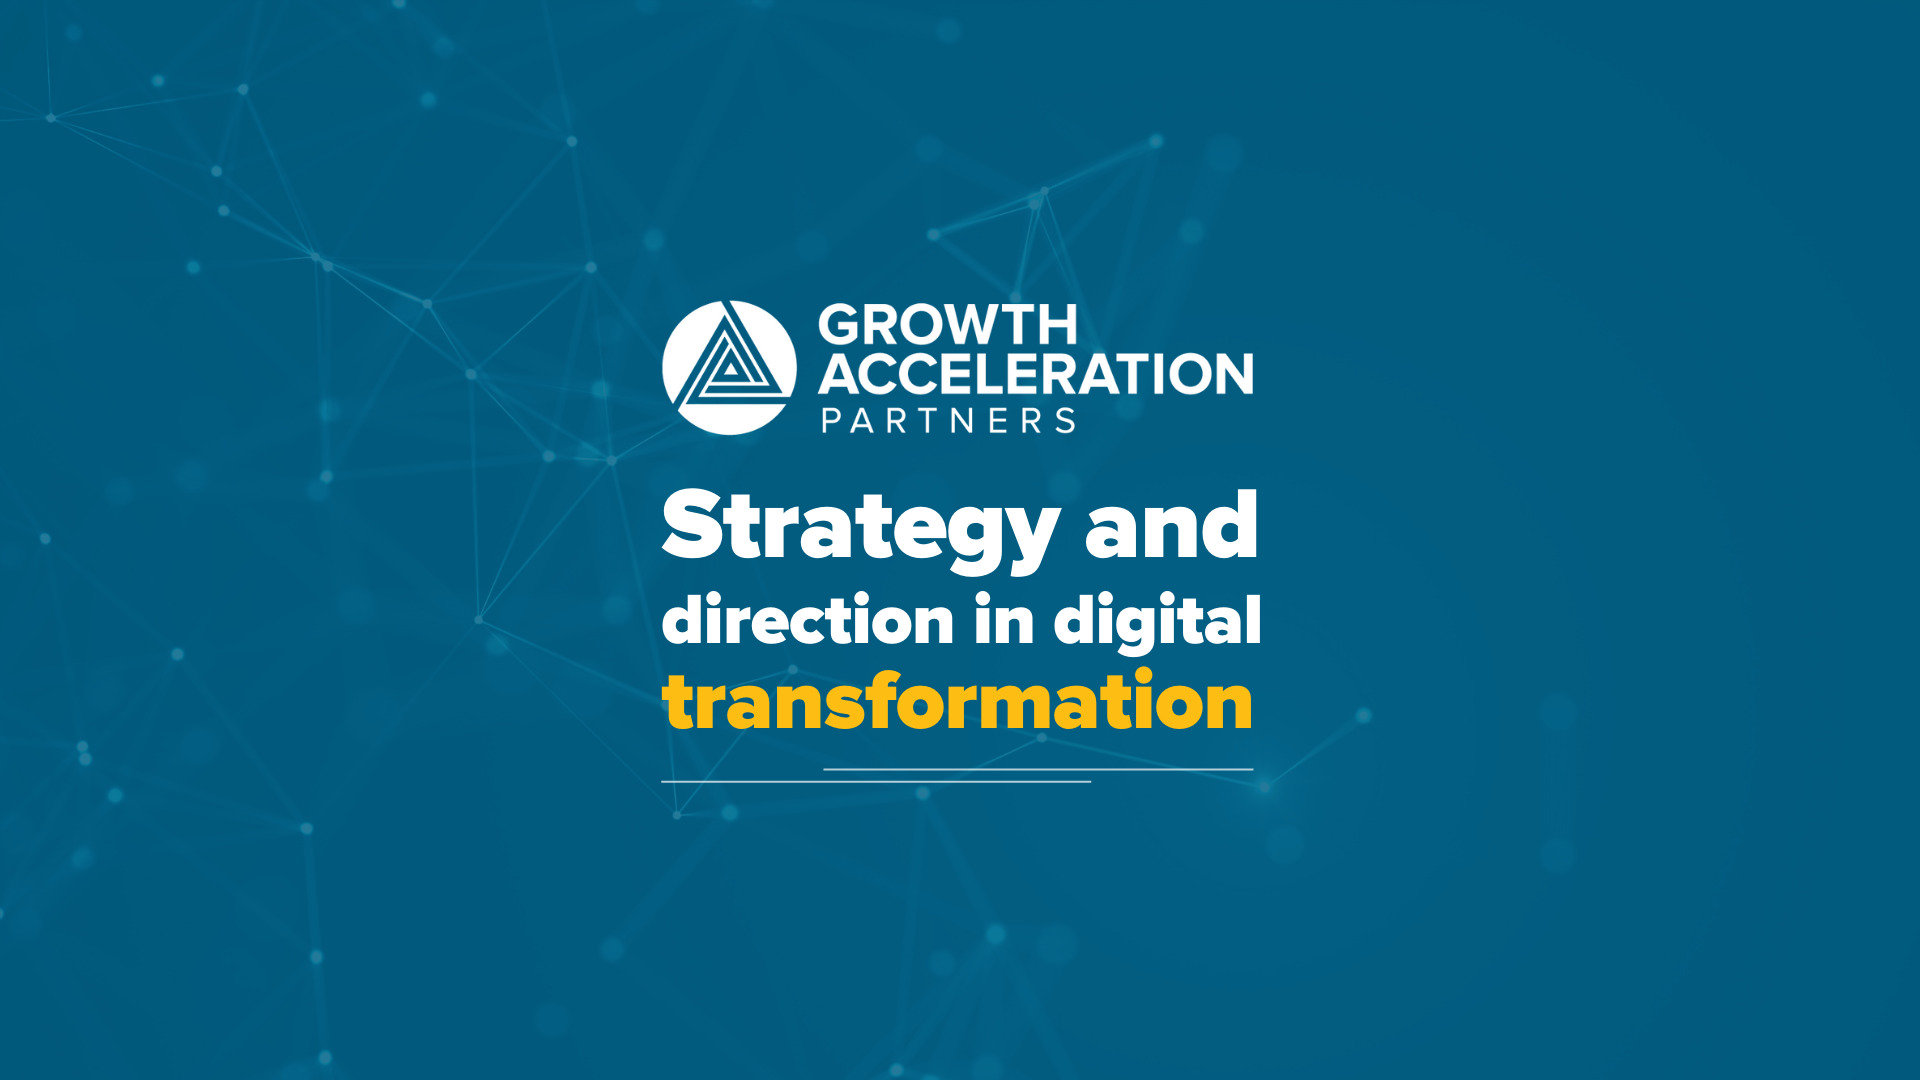 Growth Acceleration Partners Launches Modernization Advisory and Architectural Consulting